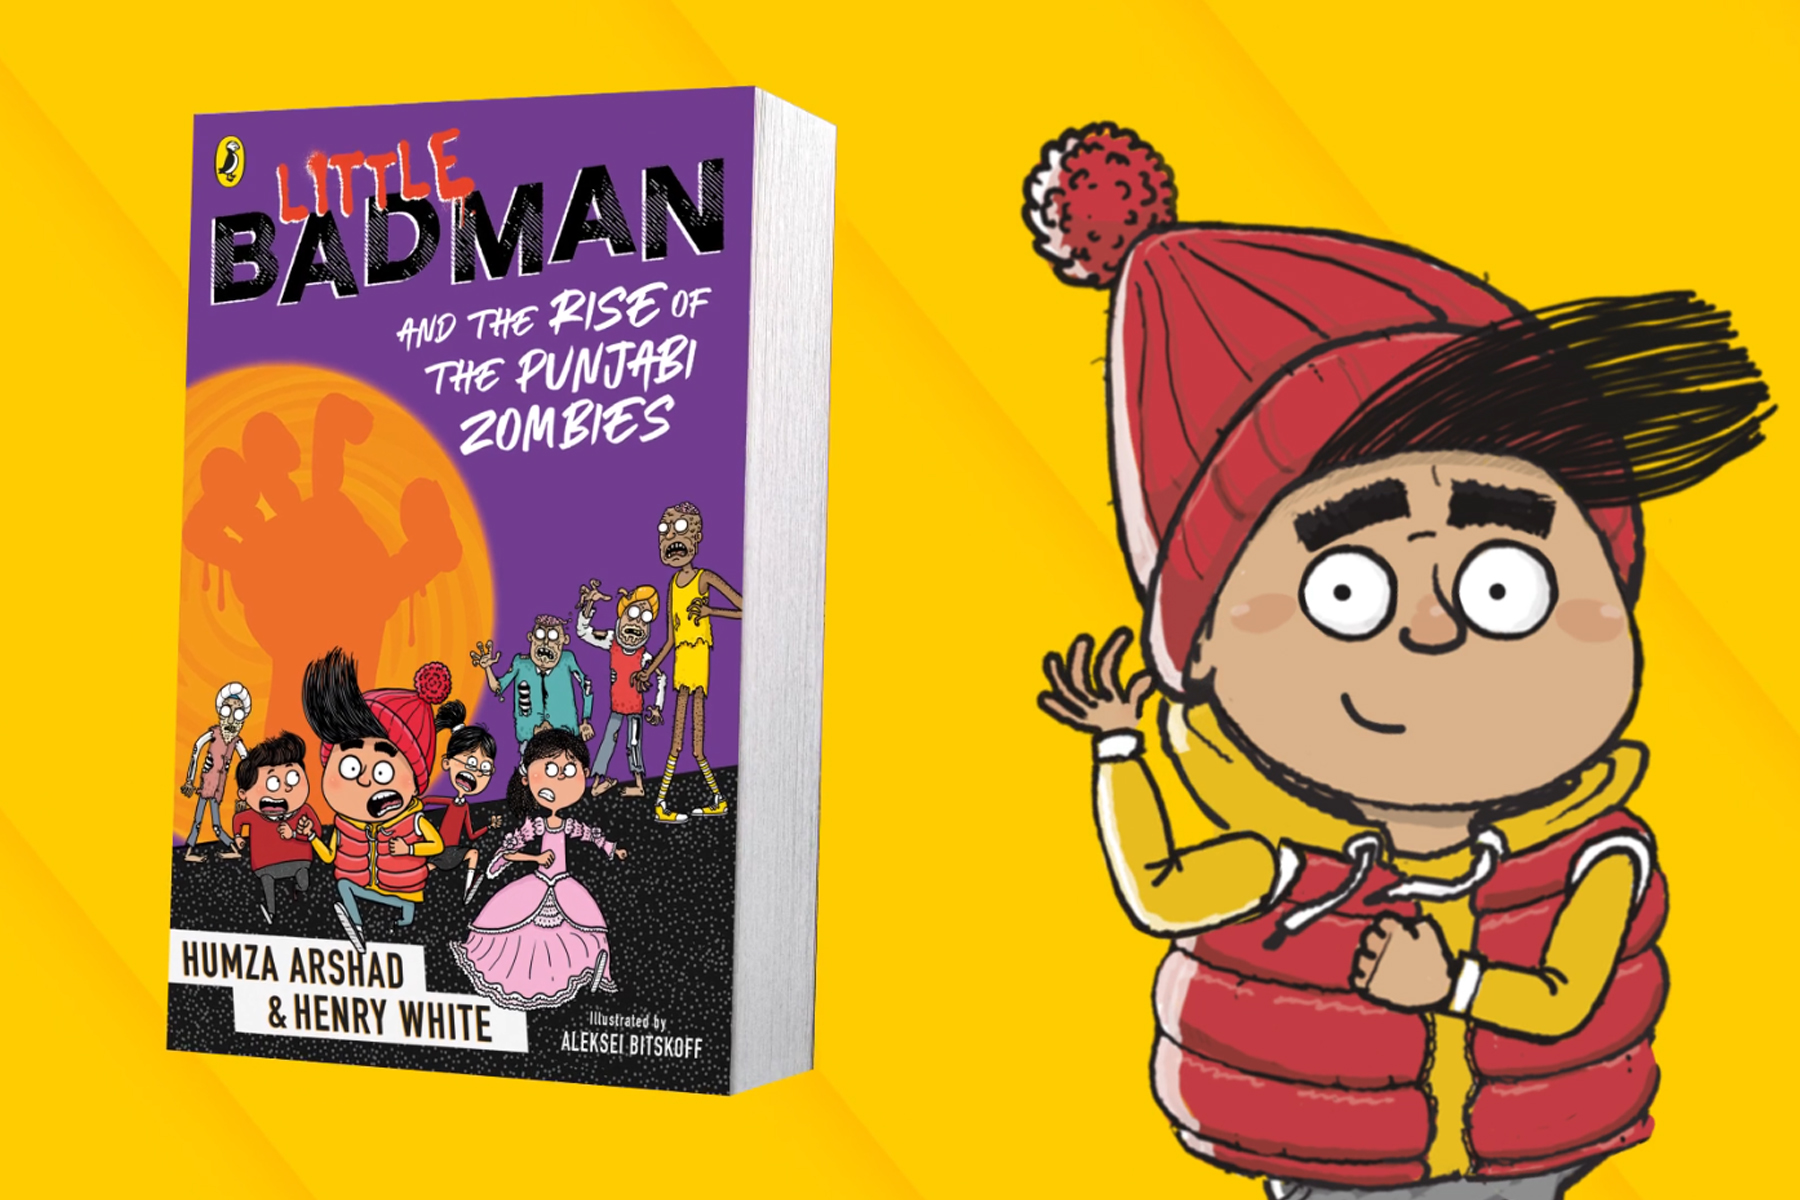 An image of the new book Little Badman and the Rise of the Punjabi Zombies against a yellow background and next to an illustration of the character Little Badman